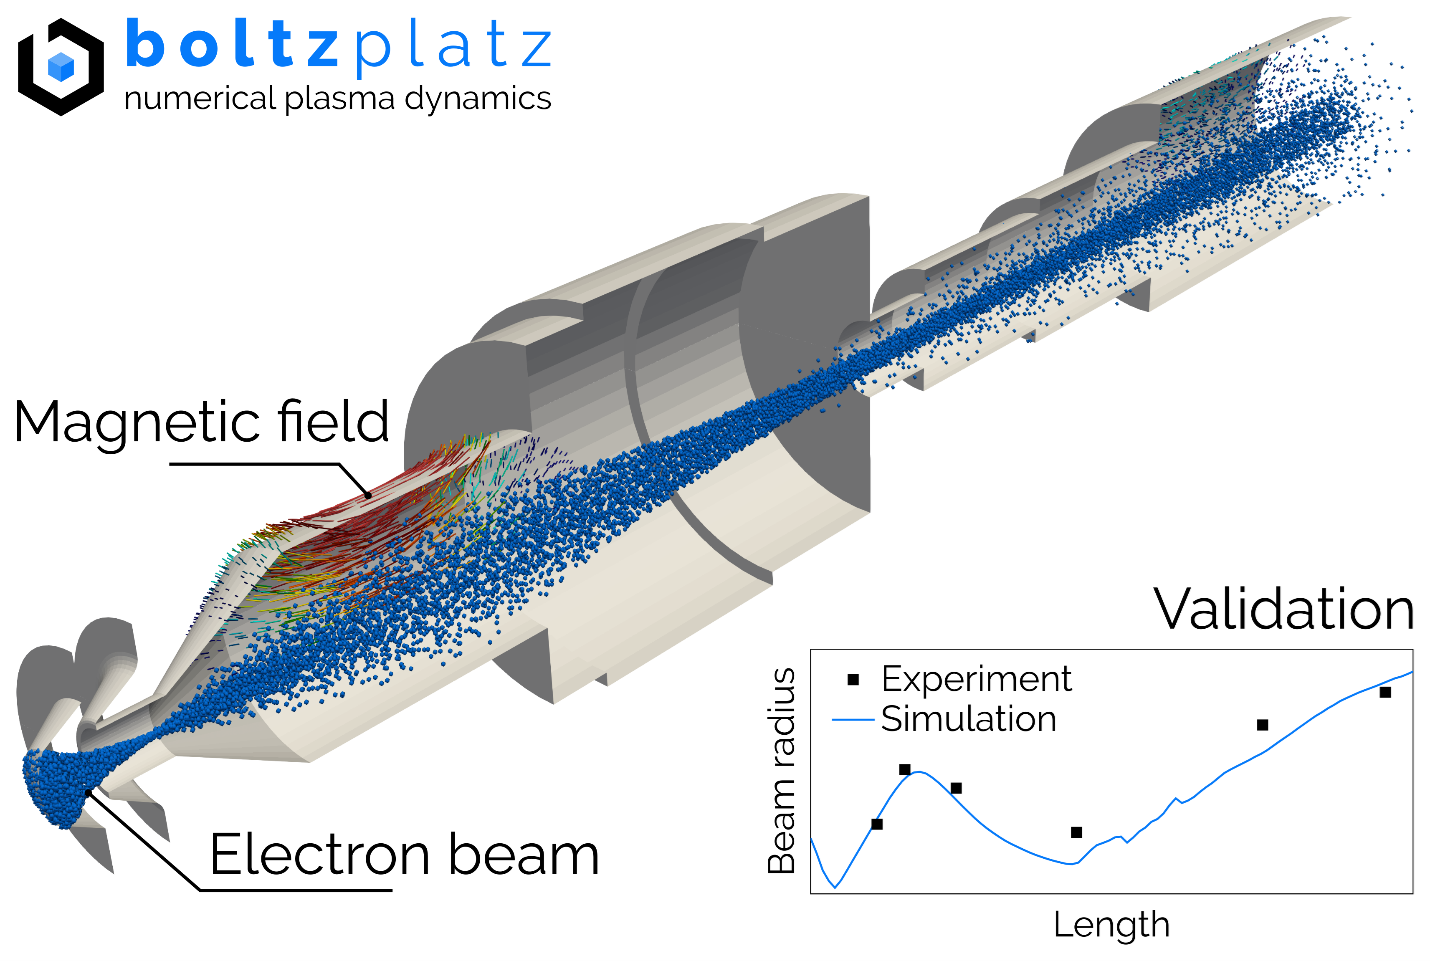 Figure 3: The simulation result, including the electron beam generator (gray) and the electron beam itself (blue). Vectors depict the applied magnetic field. Electrons are generated in the lower left corner and accelerated through a potential difference. A magnetic field further downstream focuses the beam and guides it toward the generator exit. The simulation results show good agreement with experimental measurements, as shown in the lower right corner.